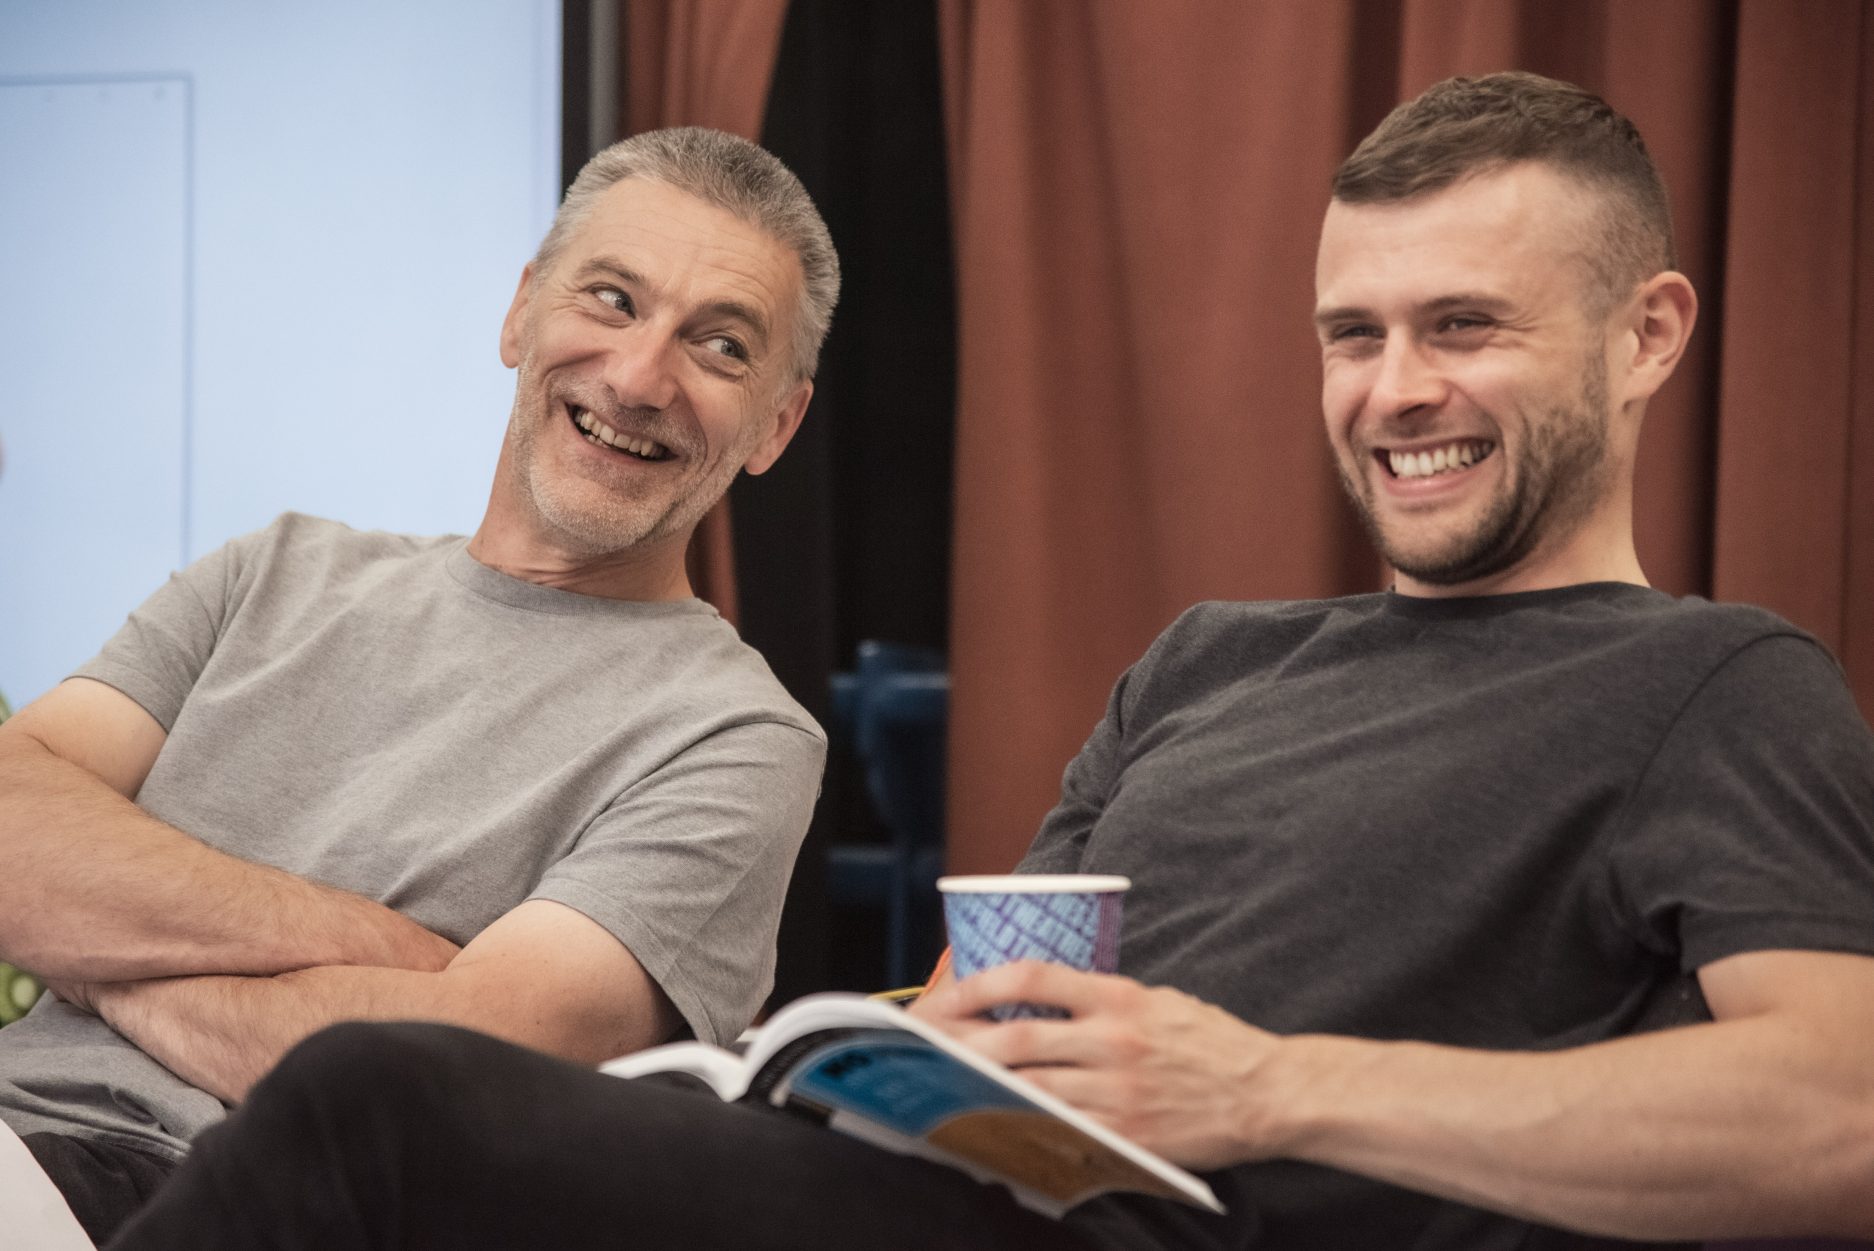 Dave Wycherley and Max Gartery (BSL Interpreters) in rehearsals for Much Ado About Nothing. Photo by Chris Saunders.